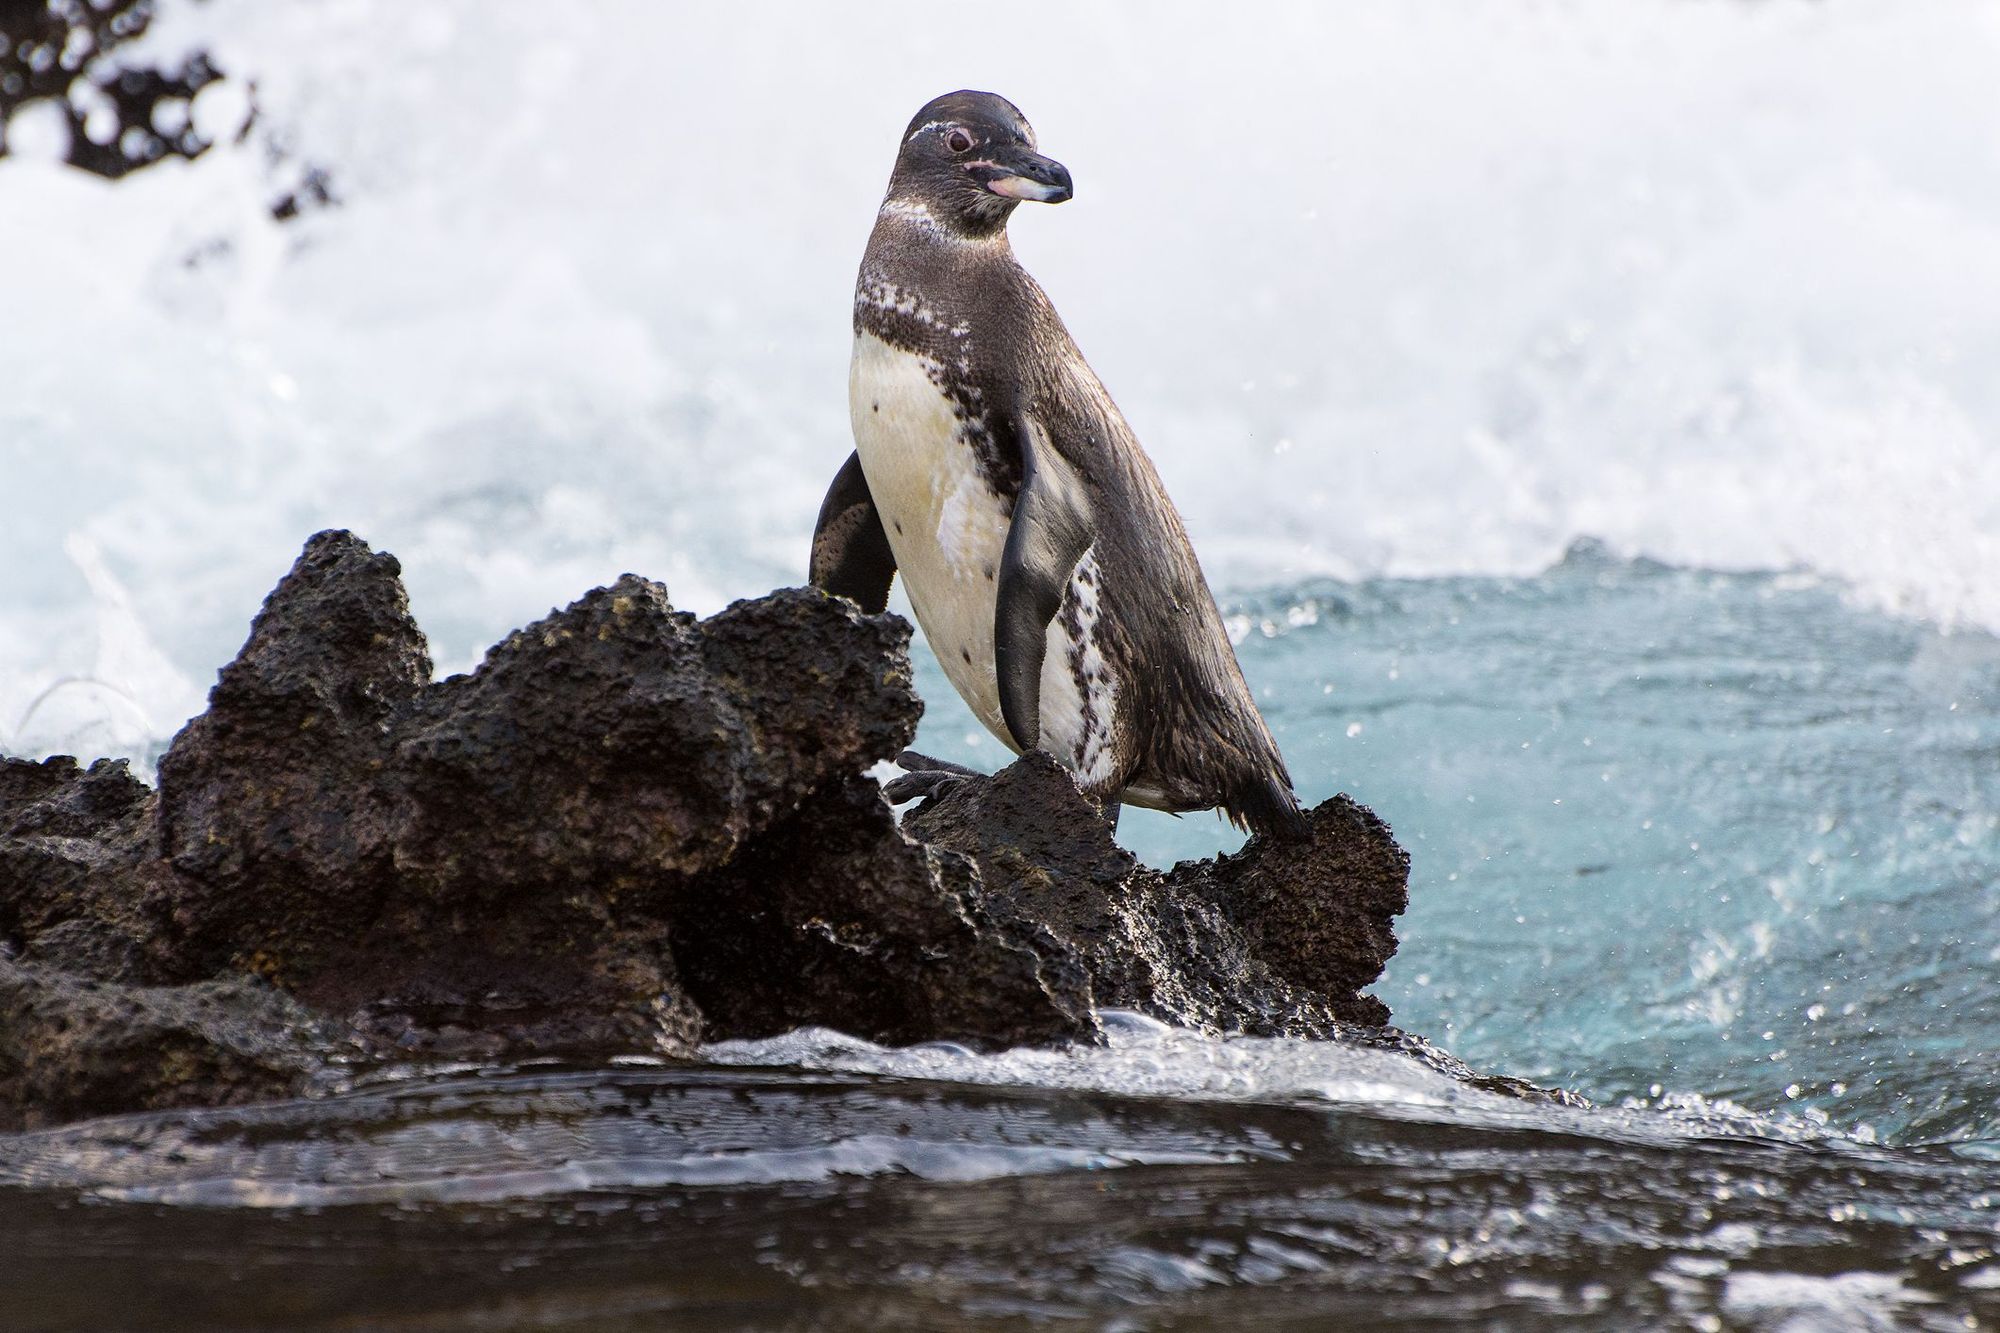 A Galapagos penguin perched on a rocky shoreline. Photo: Getty.